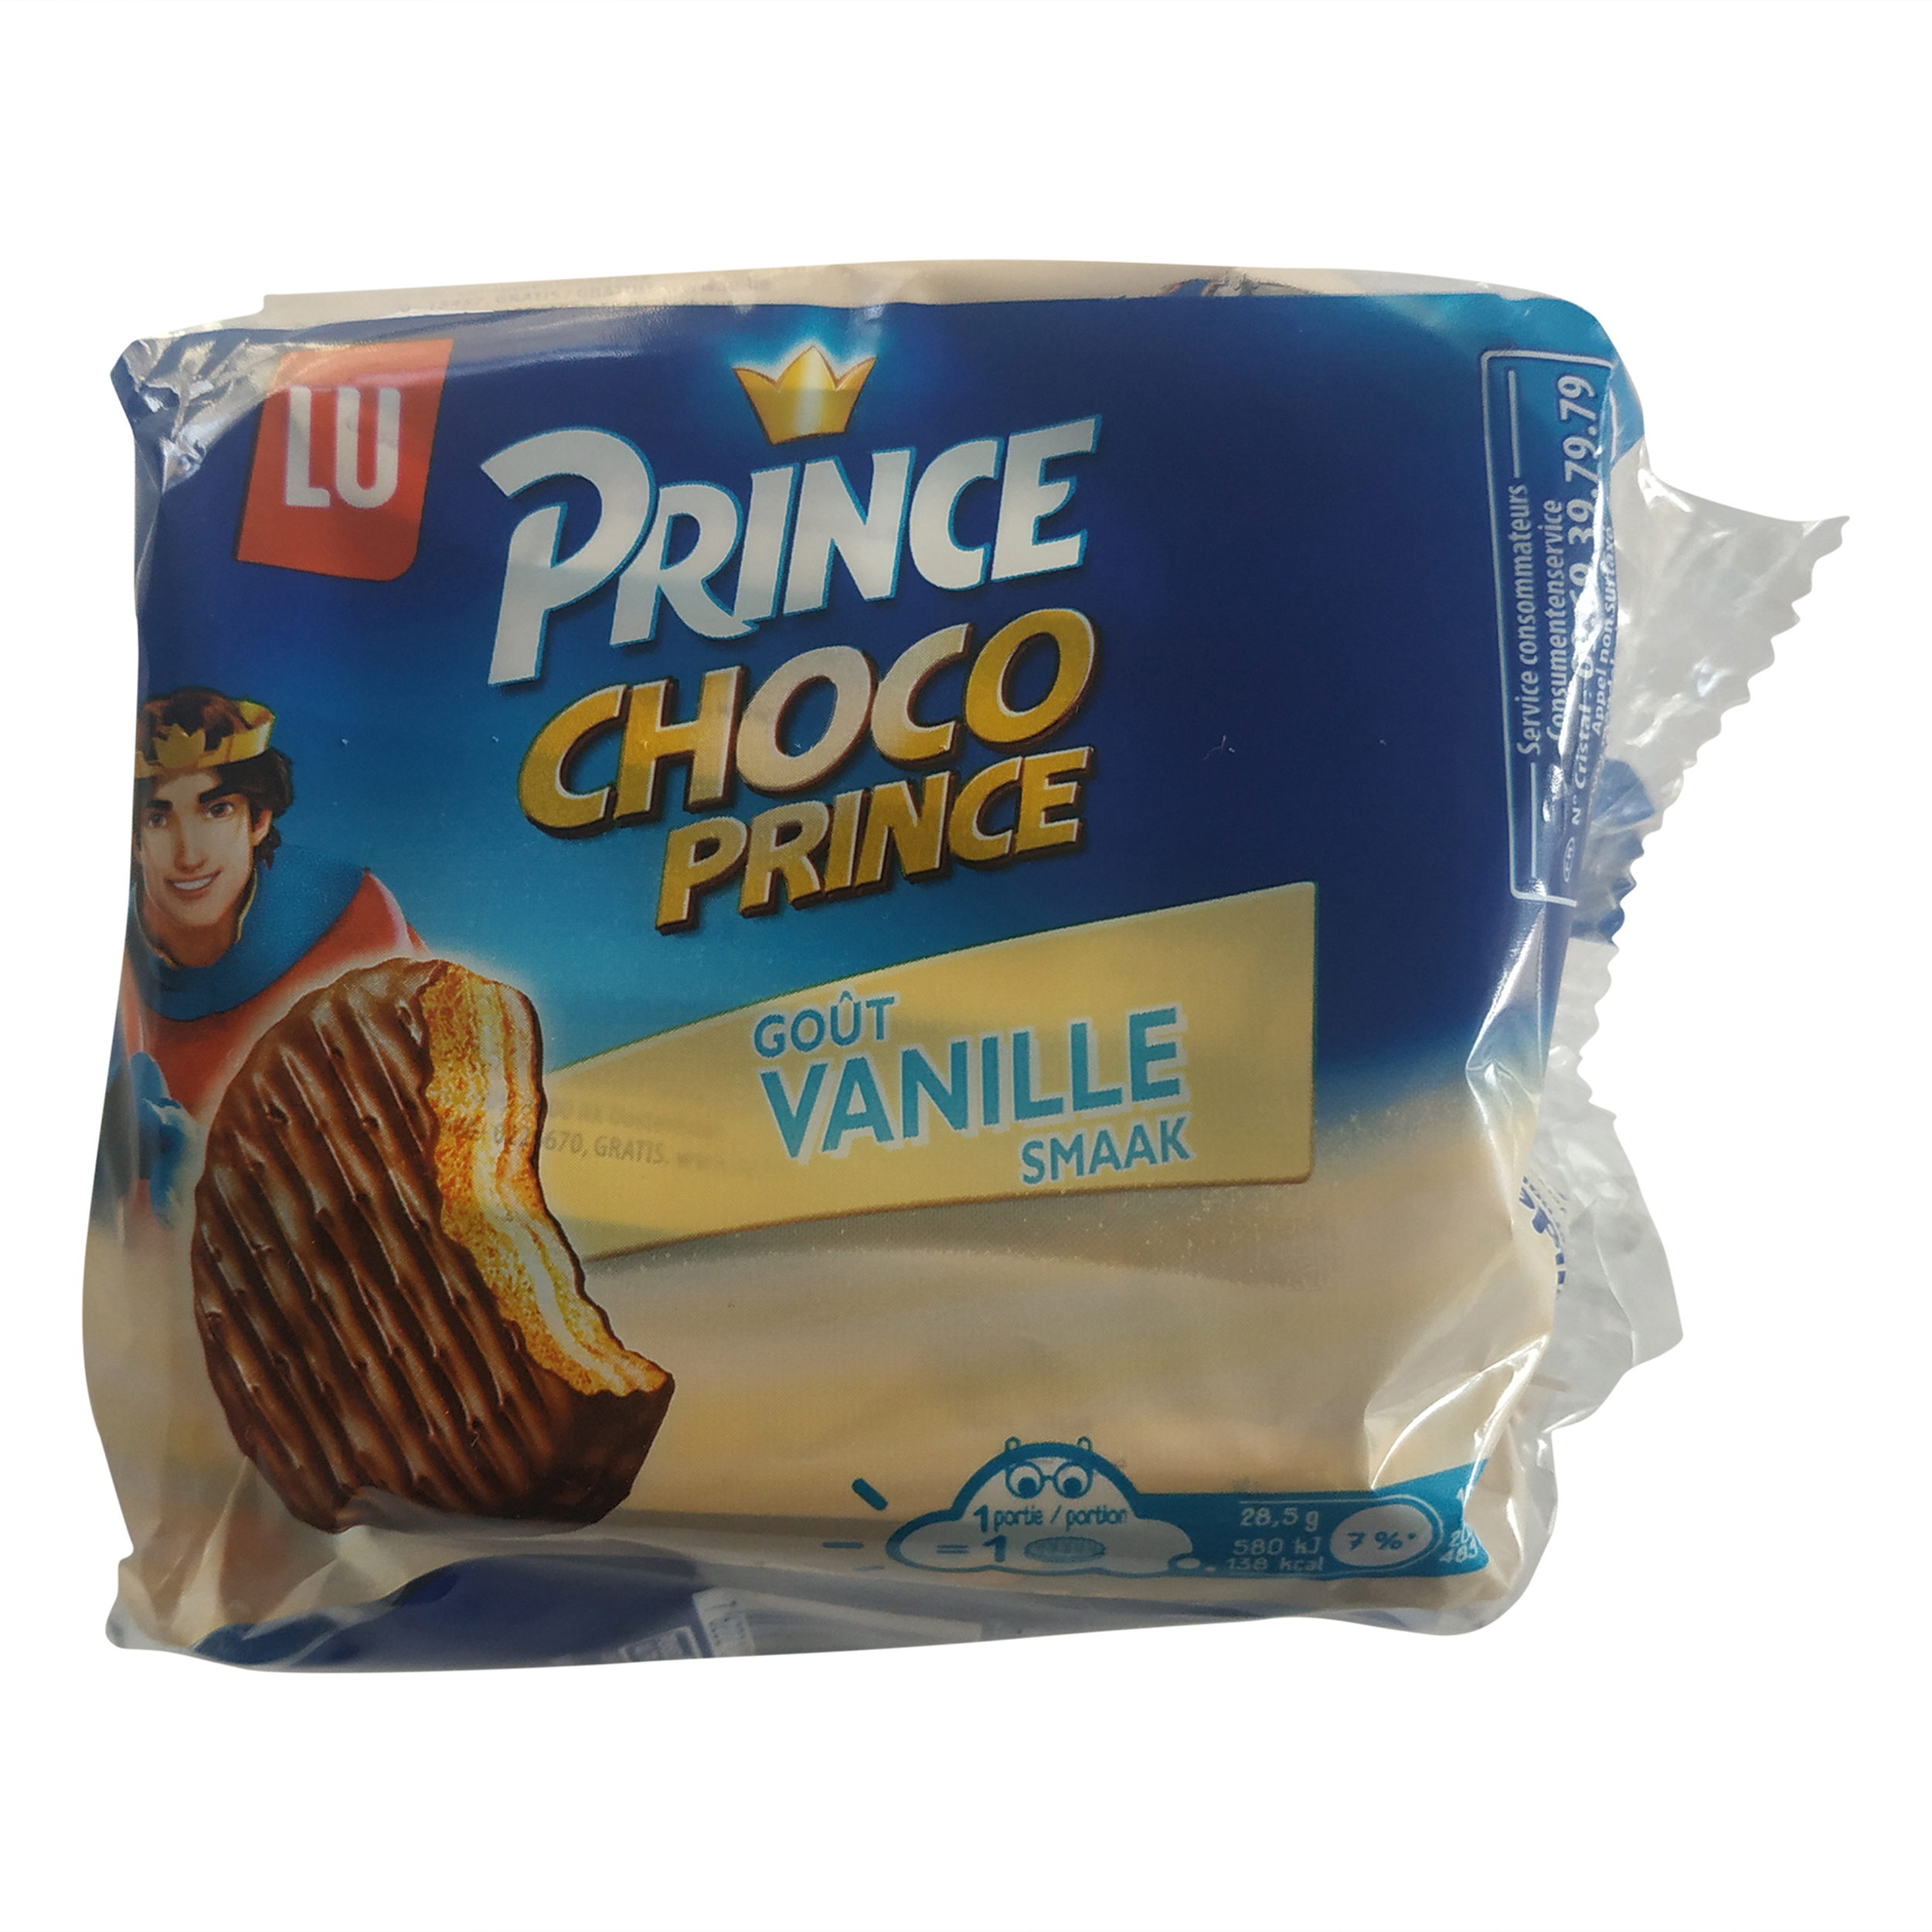 LU Prince Biscuits filled with whole wheat milk chocolate 300g is not halal